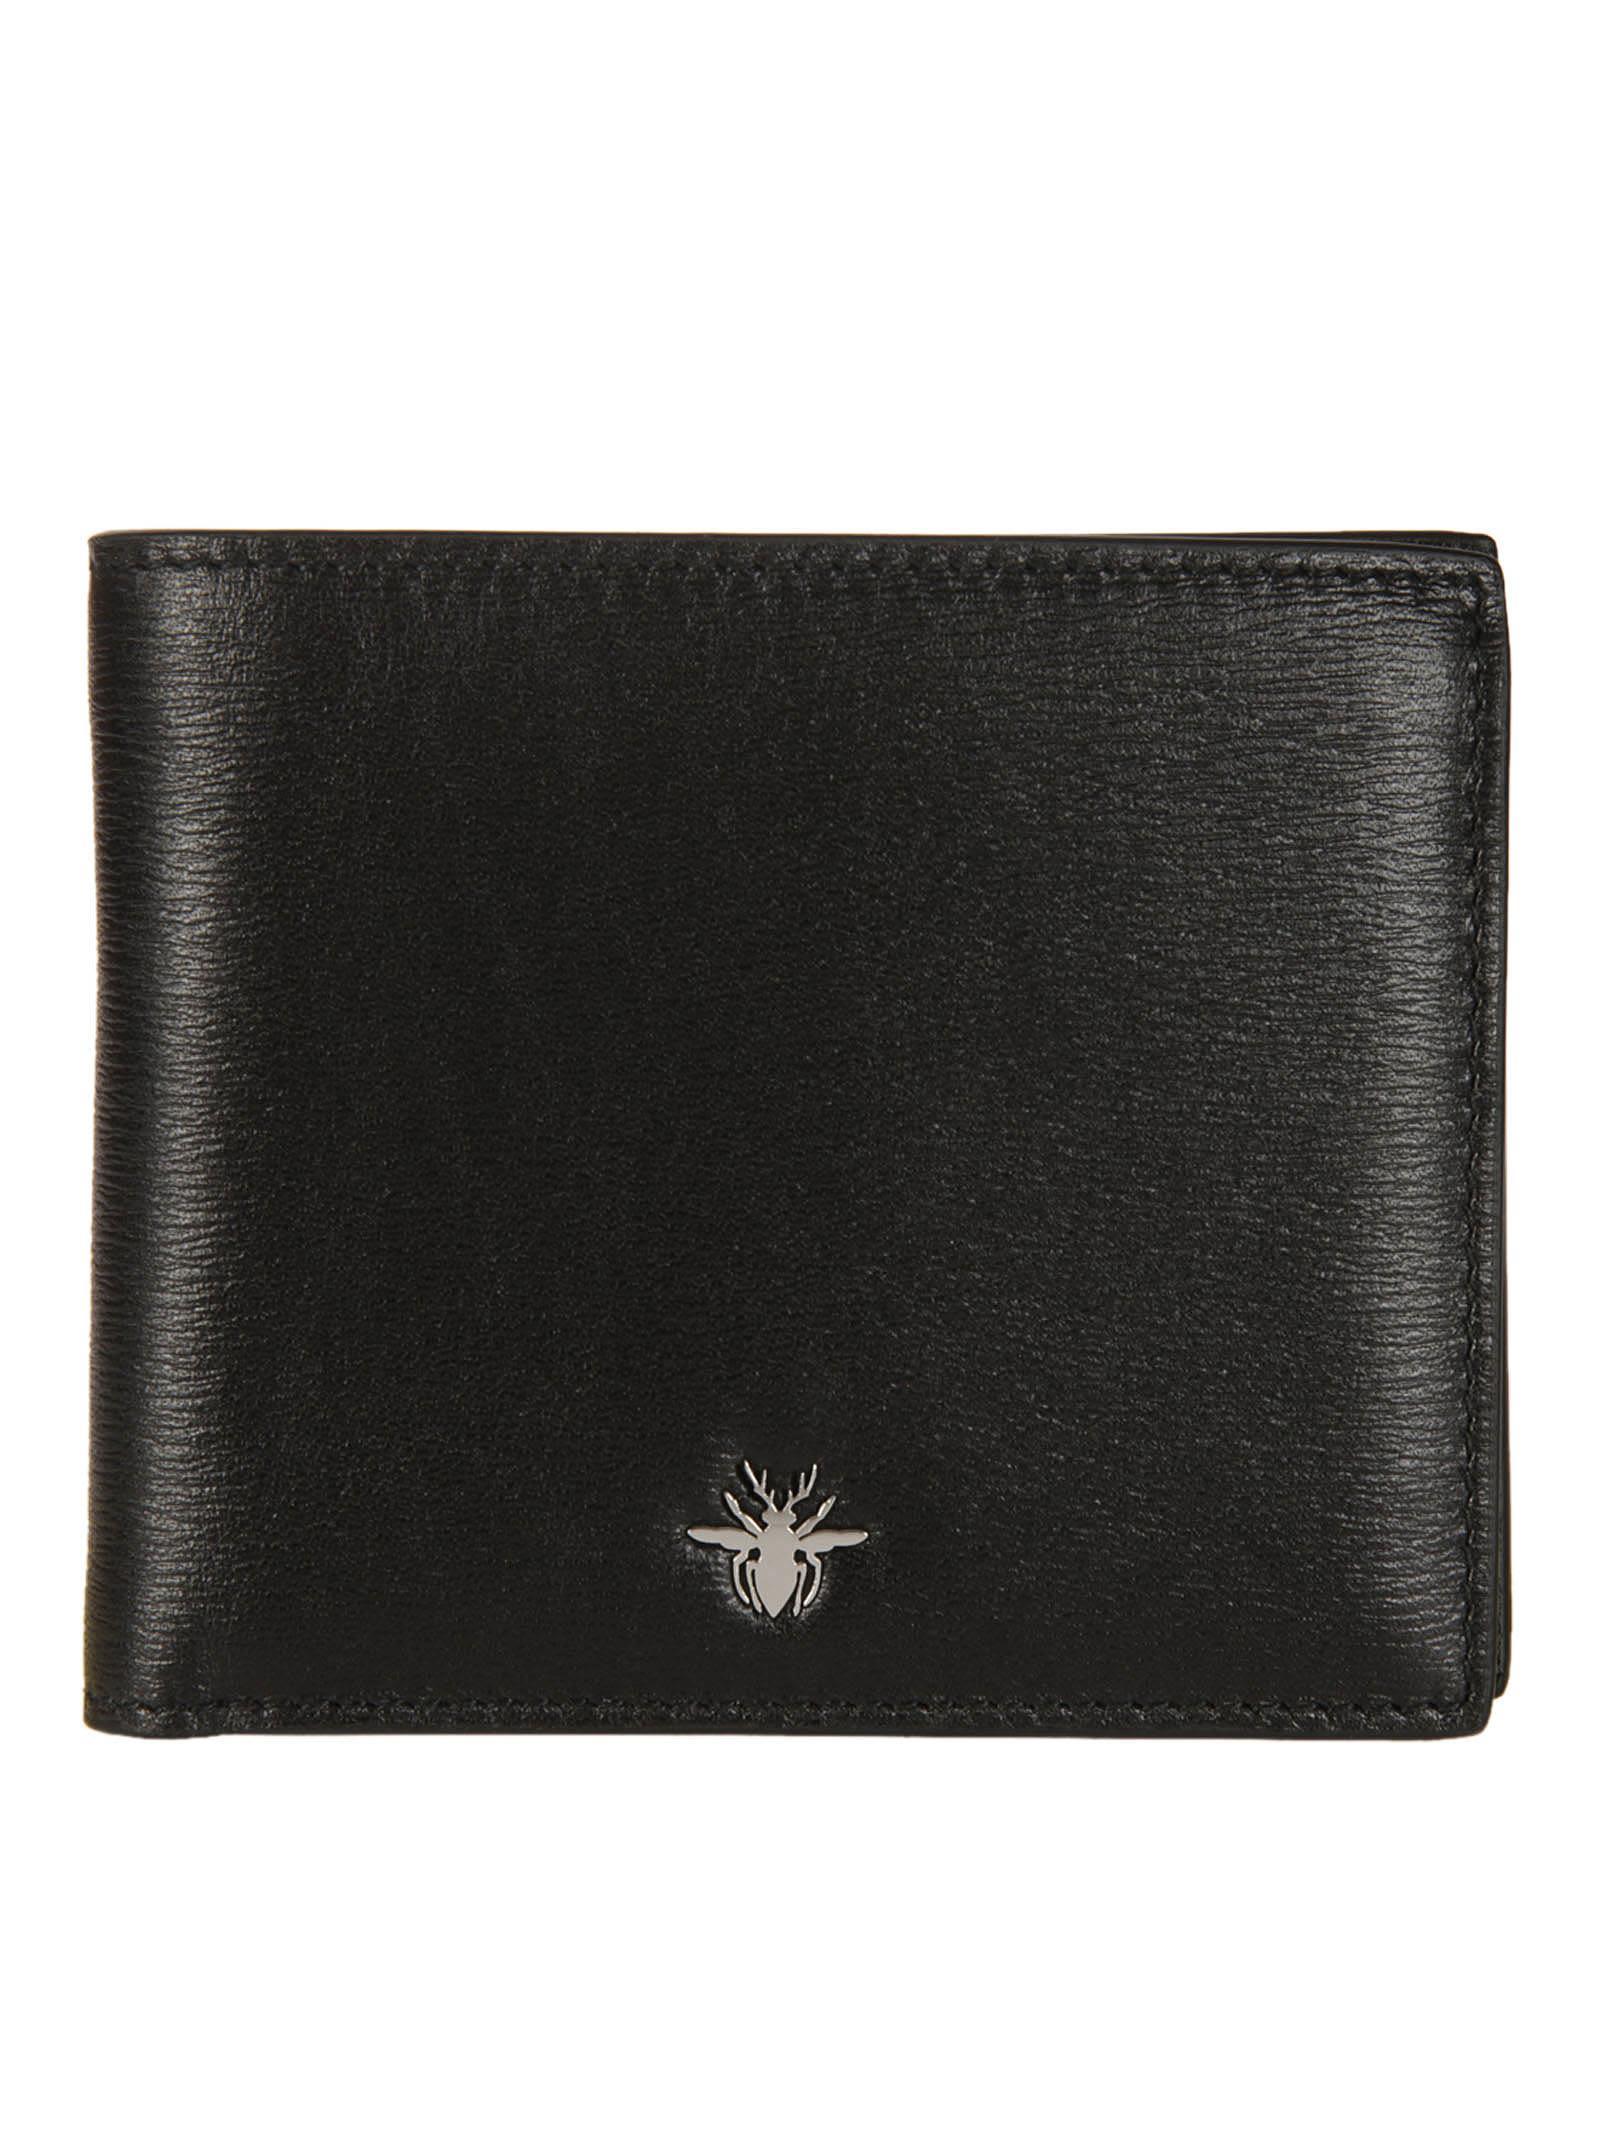 Dior Homme Signature Bee Wallet In Black | ModeSens